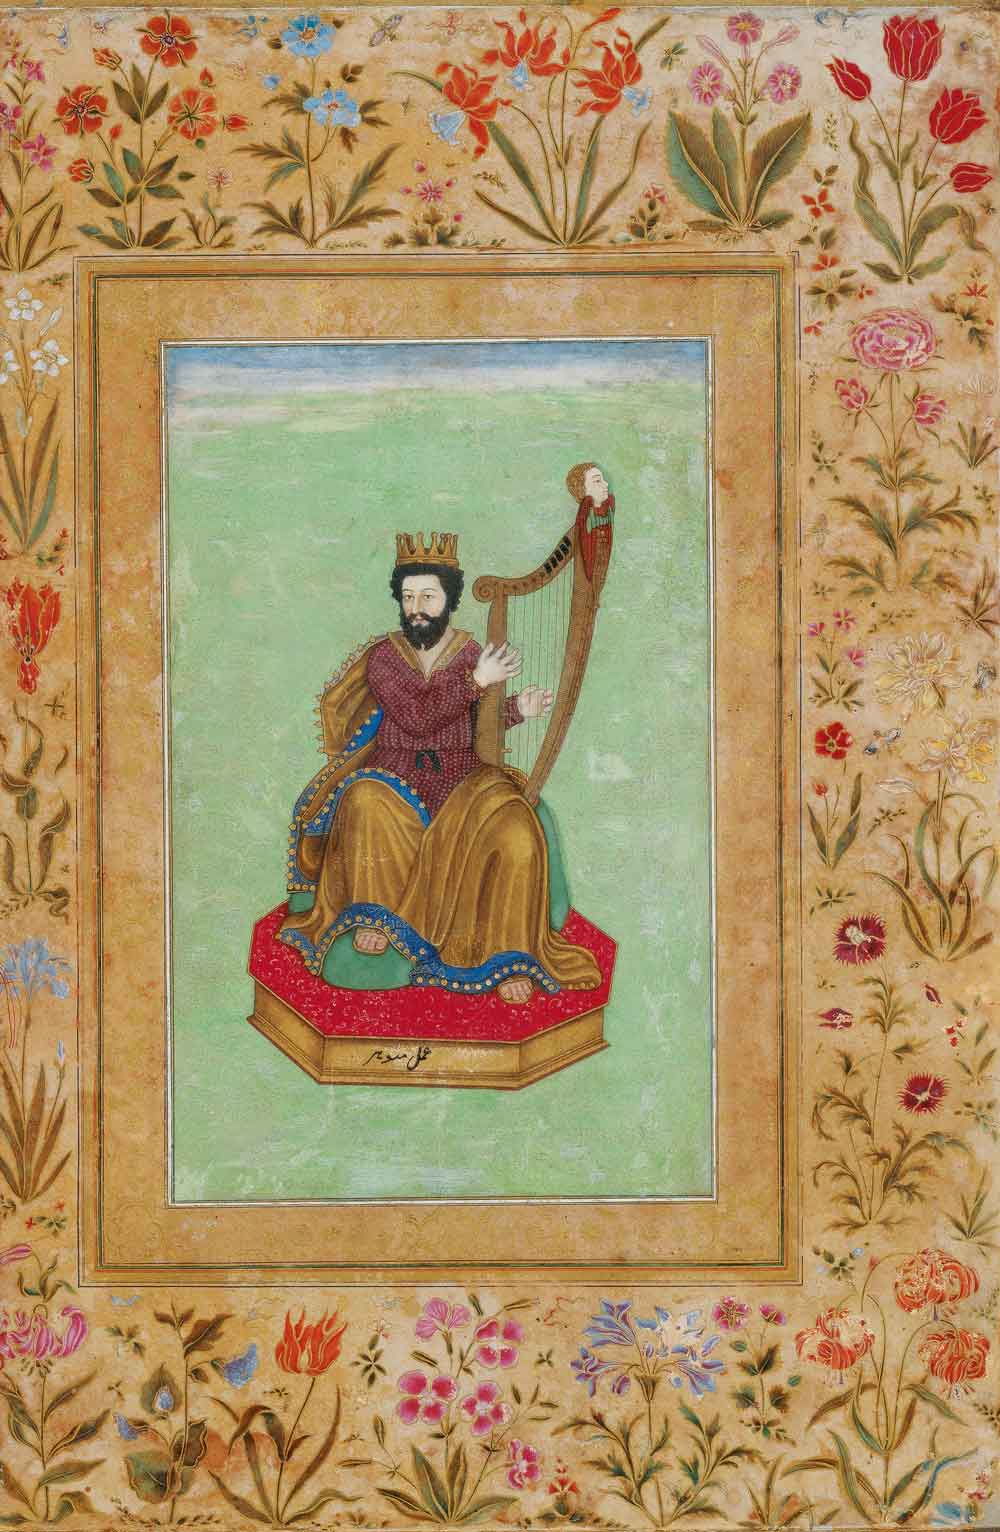 Album leaf with naturalistic flowers, India, Mughal; c. 1630-1640 The Great Mughal Jahangir (r. 1605-1627) was captivated by nature, both animals and plants, and depictions of them and court portraits achieved a high degree of naturalism during his reign. This trend continued under his son Shah Jahan (r. 1628-1657), from whose early reign the border of this album leaf probably dates, though the painting of King David is from Jahangir’s reign. Jahangir is said to have become interested in flowers during a trip to Kashmir in 1620, but the European engravings and paintings that had already arrived at the Delhi court during the reign of his father, Akbar (r. 1556-1605), were also an important factor. David was copied directly from a Flemish engraving, and the flowers were influenced by contemporary European botanical works, florilegia.